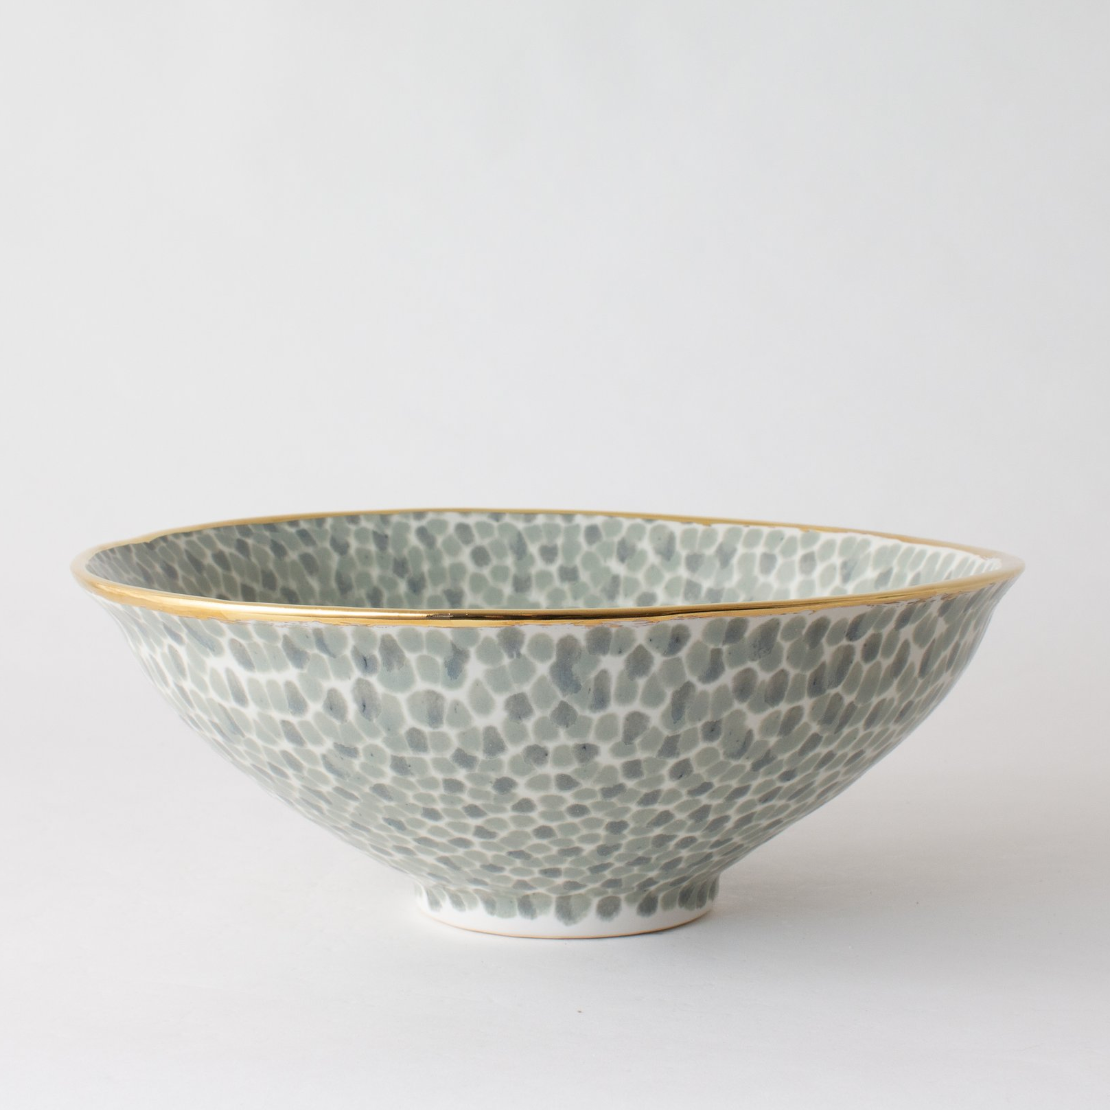 dappled ceramic bowl in pale green with gold edge